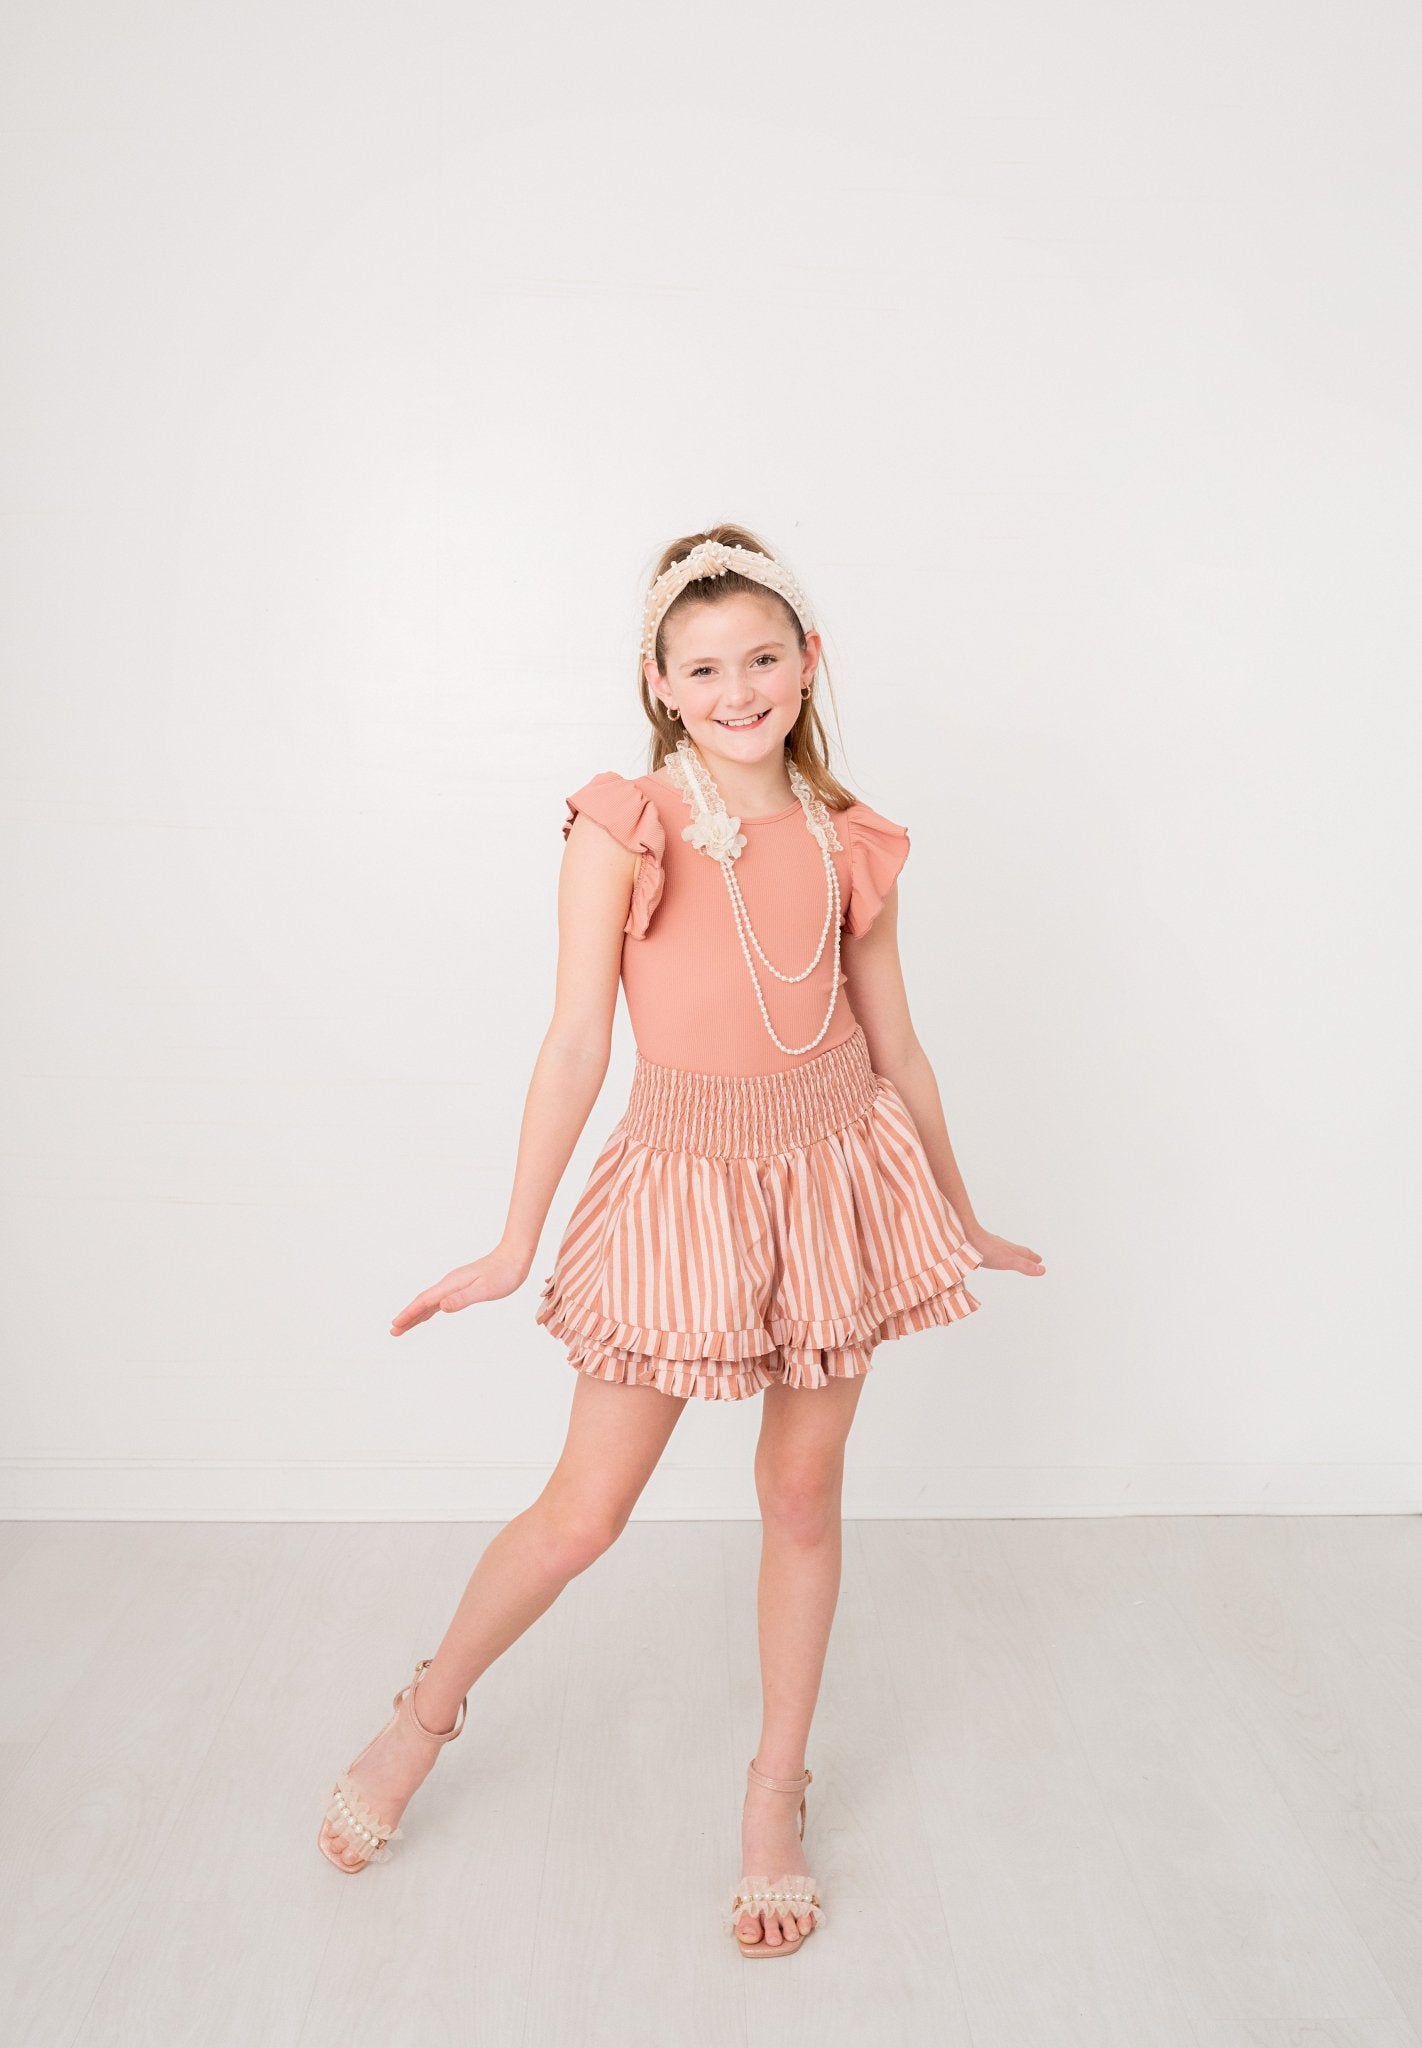 Southern Twirl Blush and Rose Bodysuit/Leotard and Skirt Simplicity Set - Evie's Closet Clothing